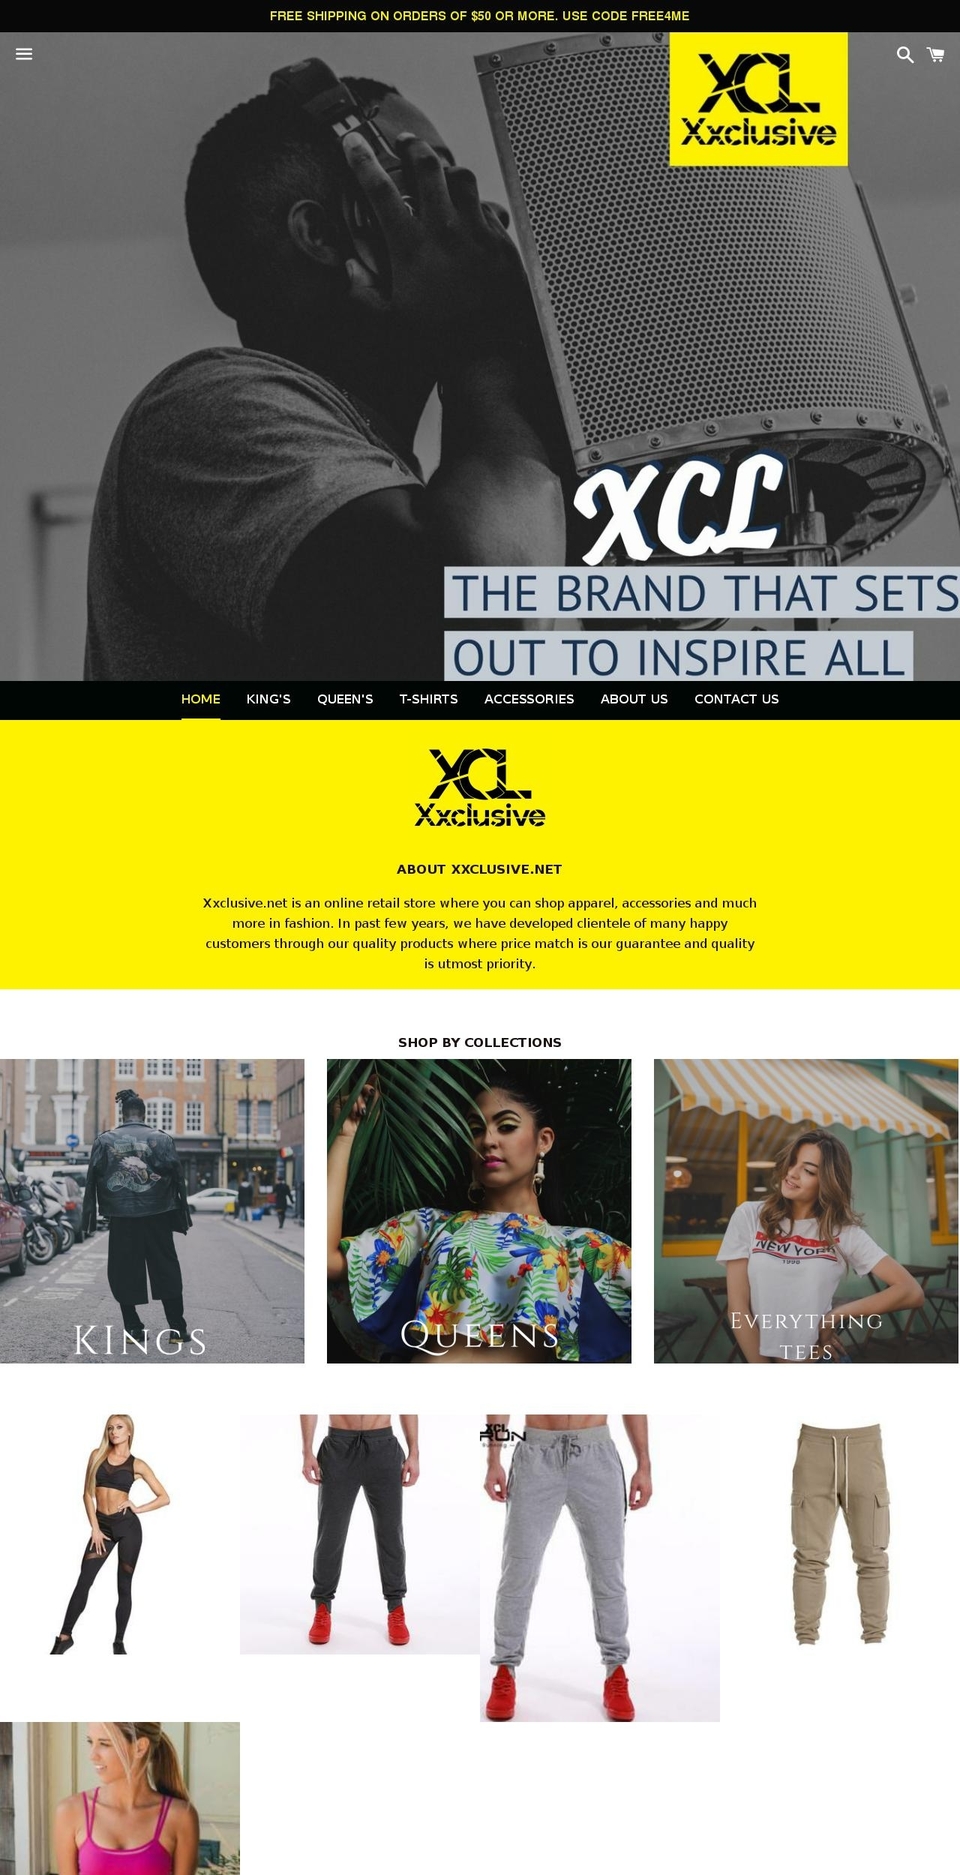 Copy of Boundless Shopify theme site example xxclusive.net